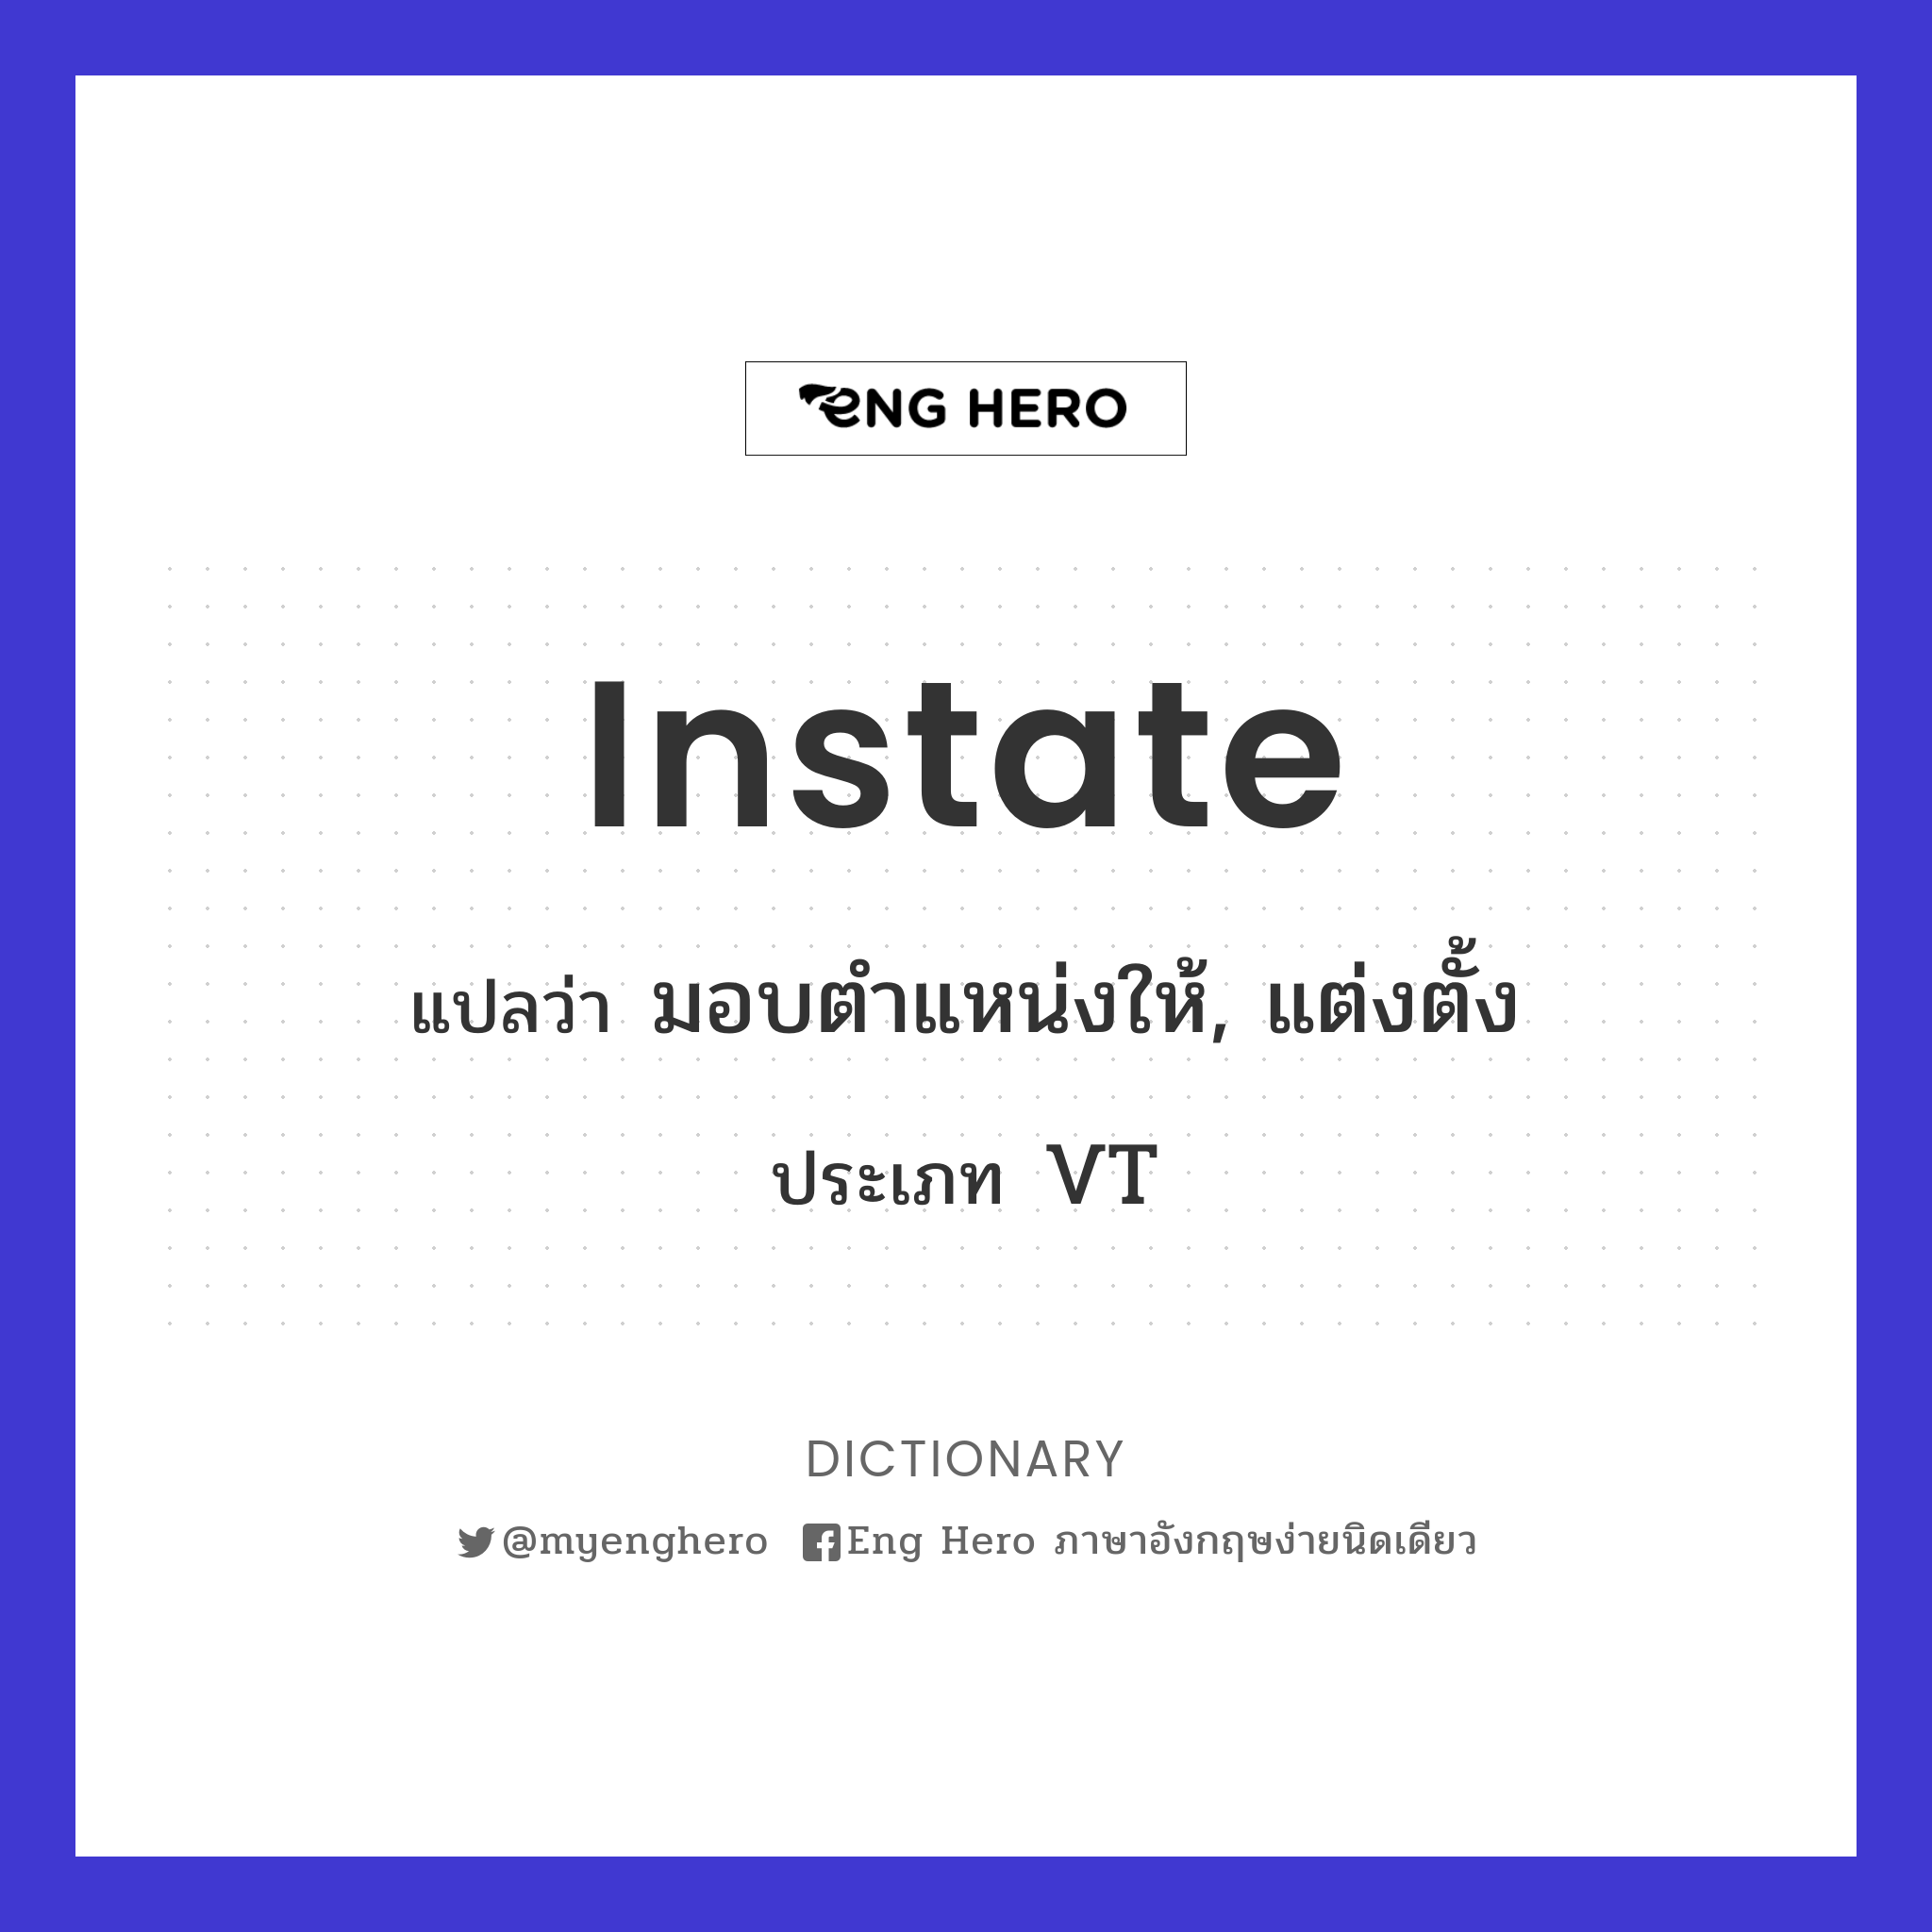 instate